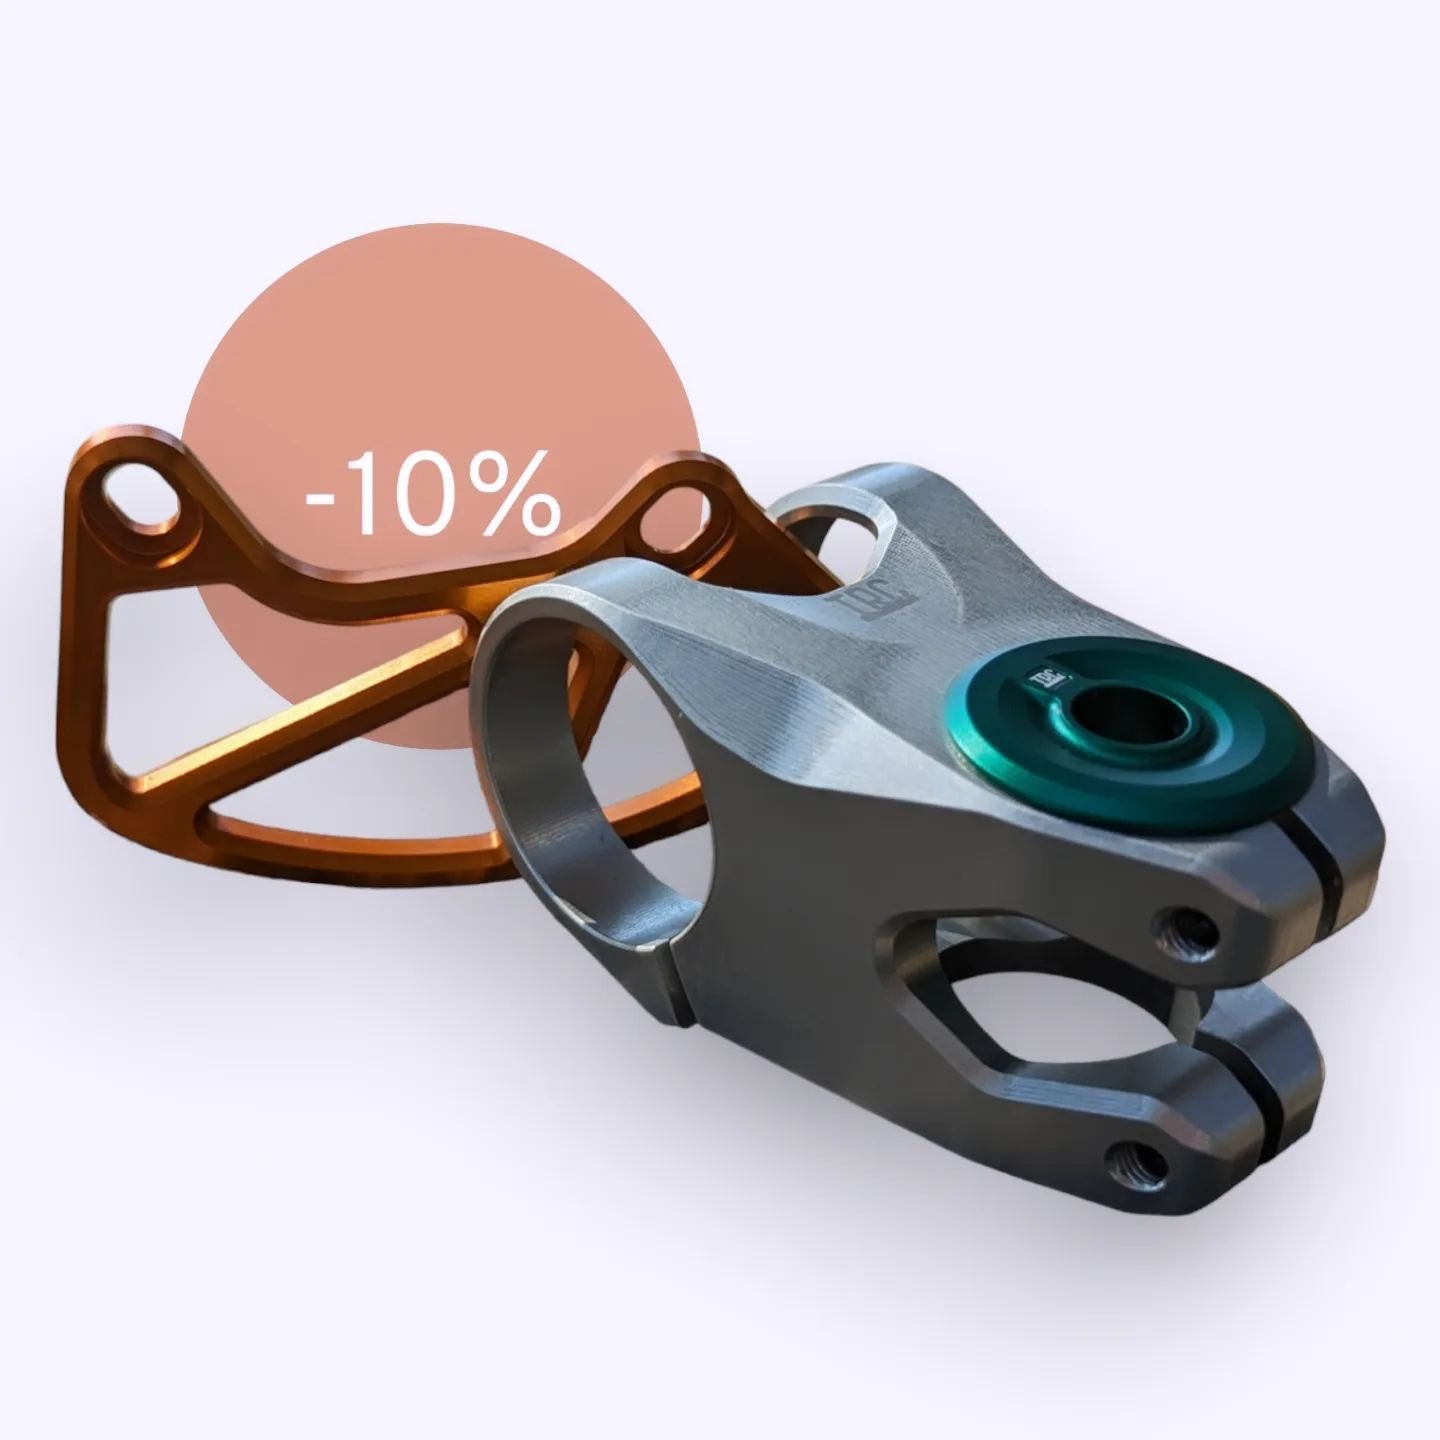 Don't forget that we're running 10% off any item throughout April! Still plenty of time left so use code APRIL at checkout.

#threerockcomponents #trc 
#sale #stem #onepiecestem #bashguard #topcap #stemcap #mtbstem #mtbcomponents #mtbparts #mtb #emtb